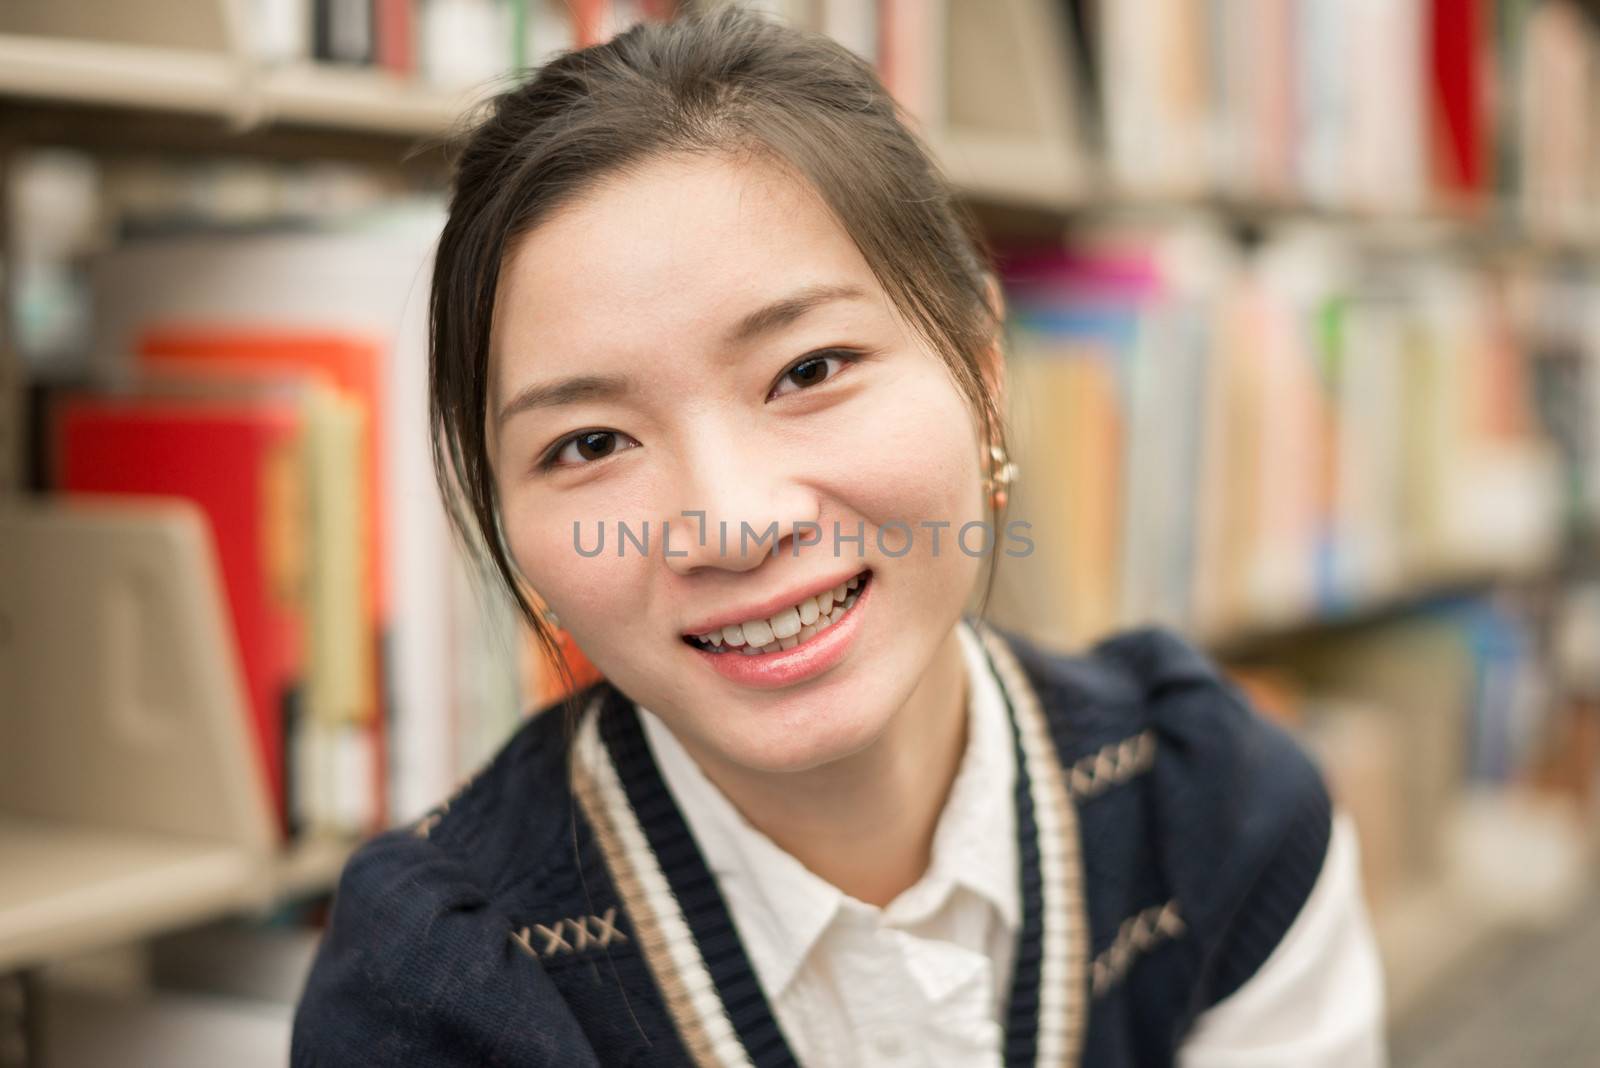 Portrait of attractive young girl smiling in library with bookshelf as background